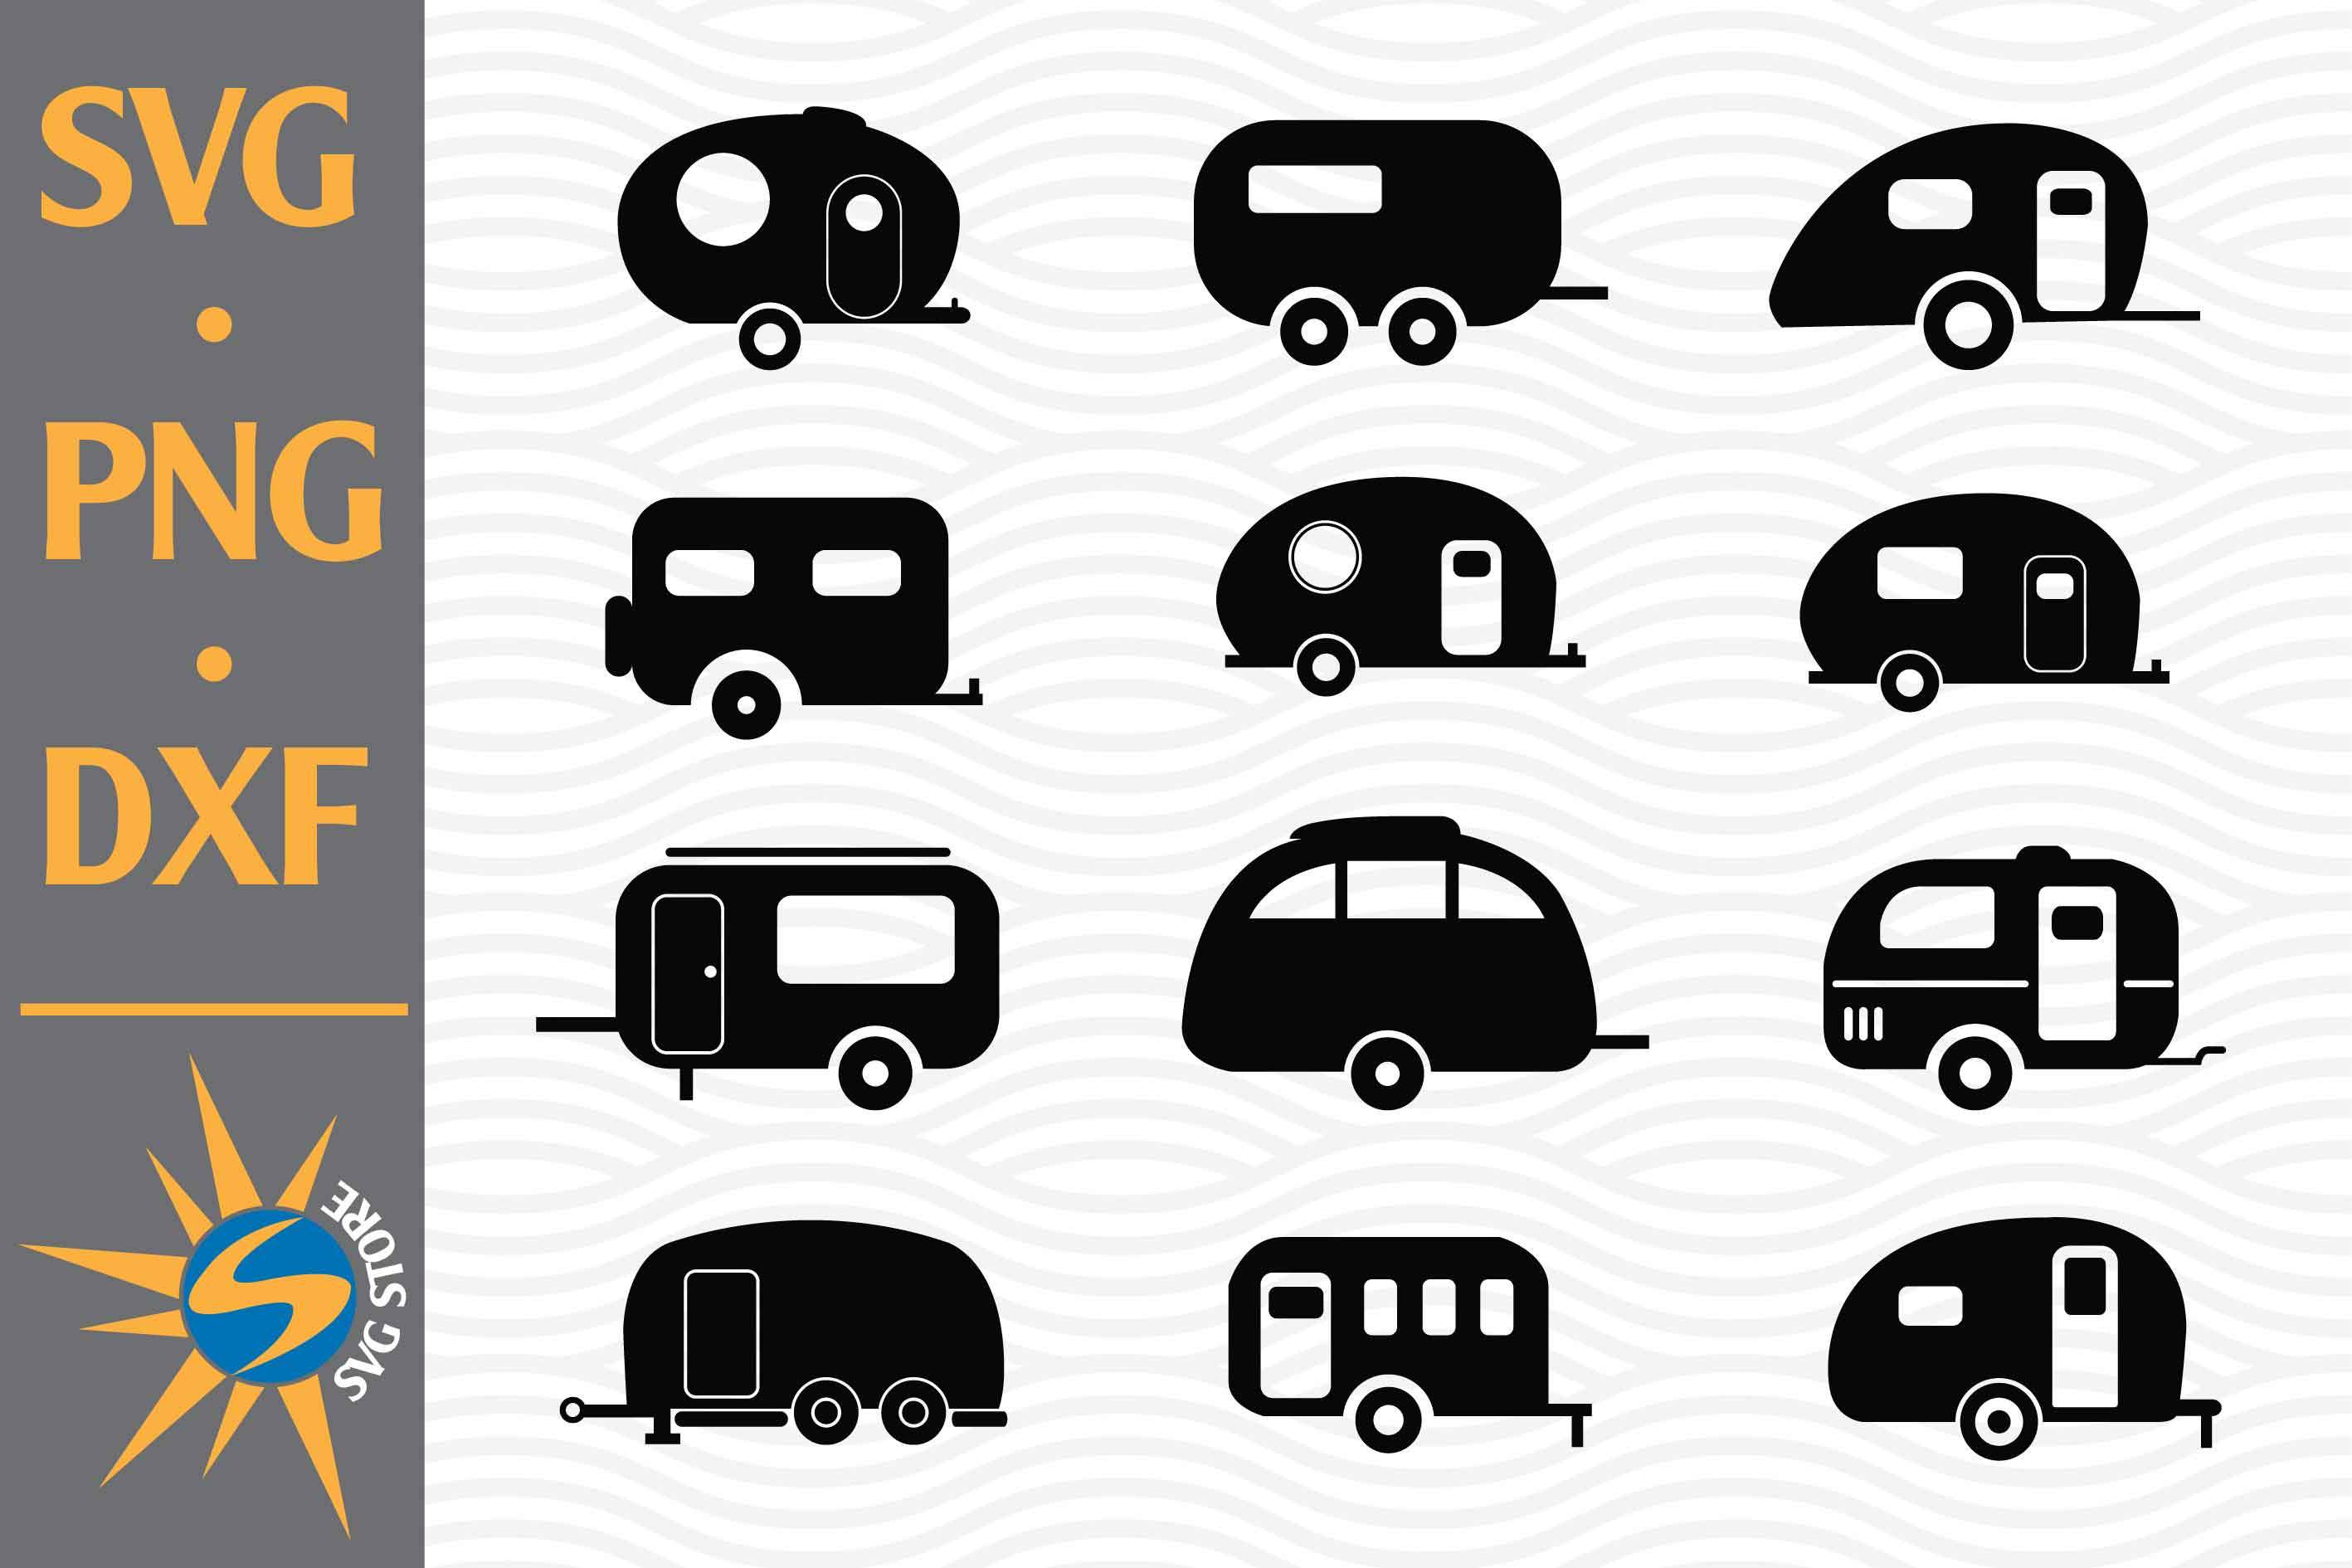 Camper Silhouette SVG, PNG, DXF Digital Files Include - So Fontsy